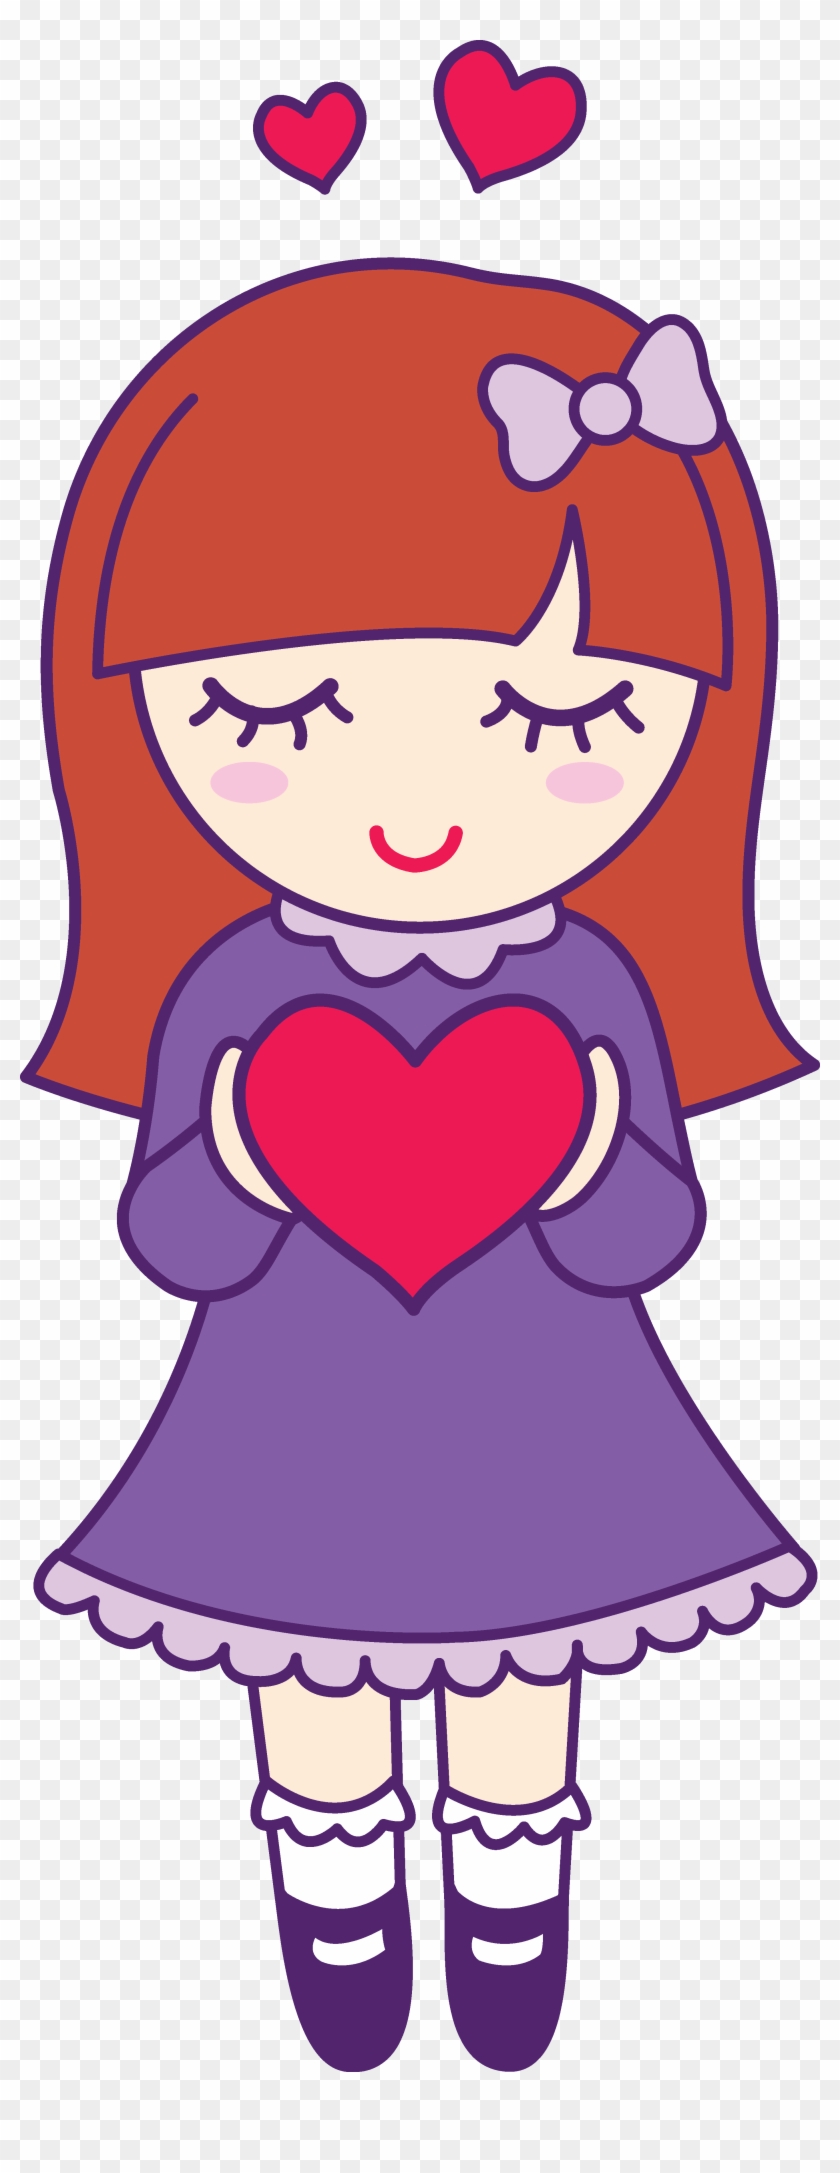 2798 X 7107 3 - Cute Girl Clipart - Png Download #653859